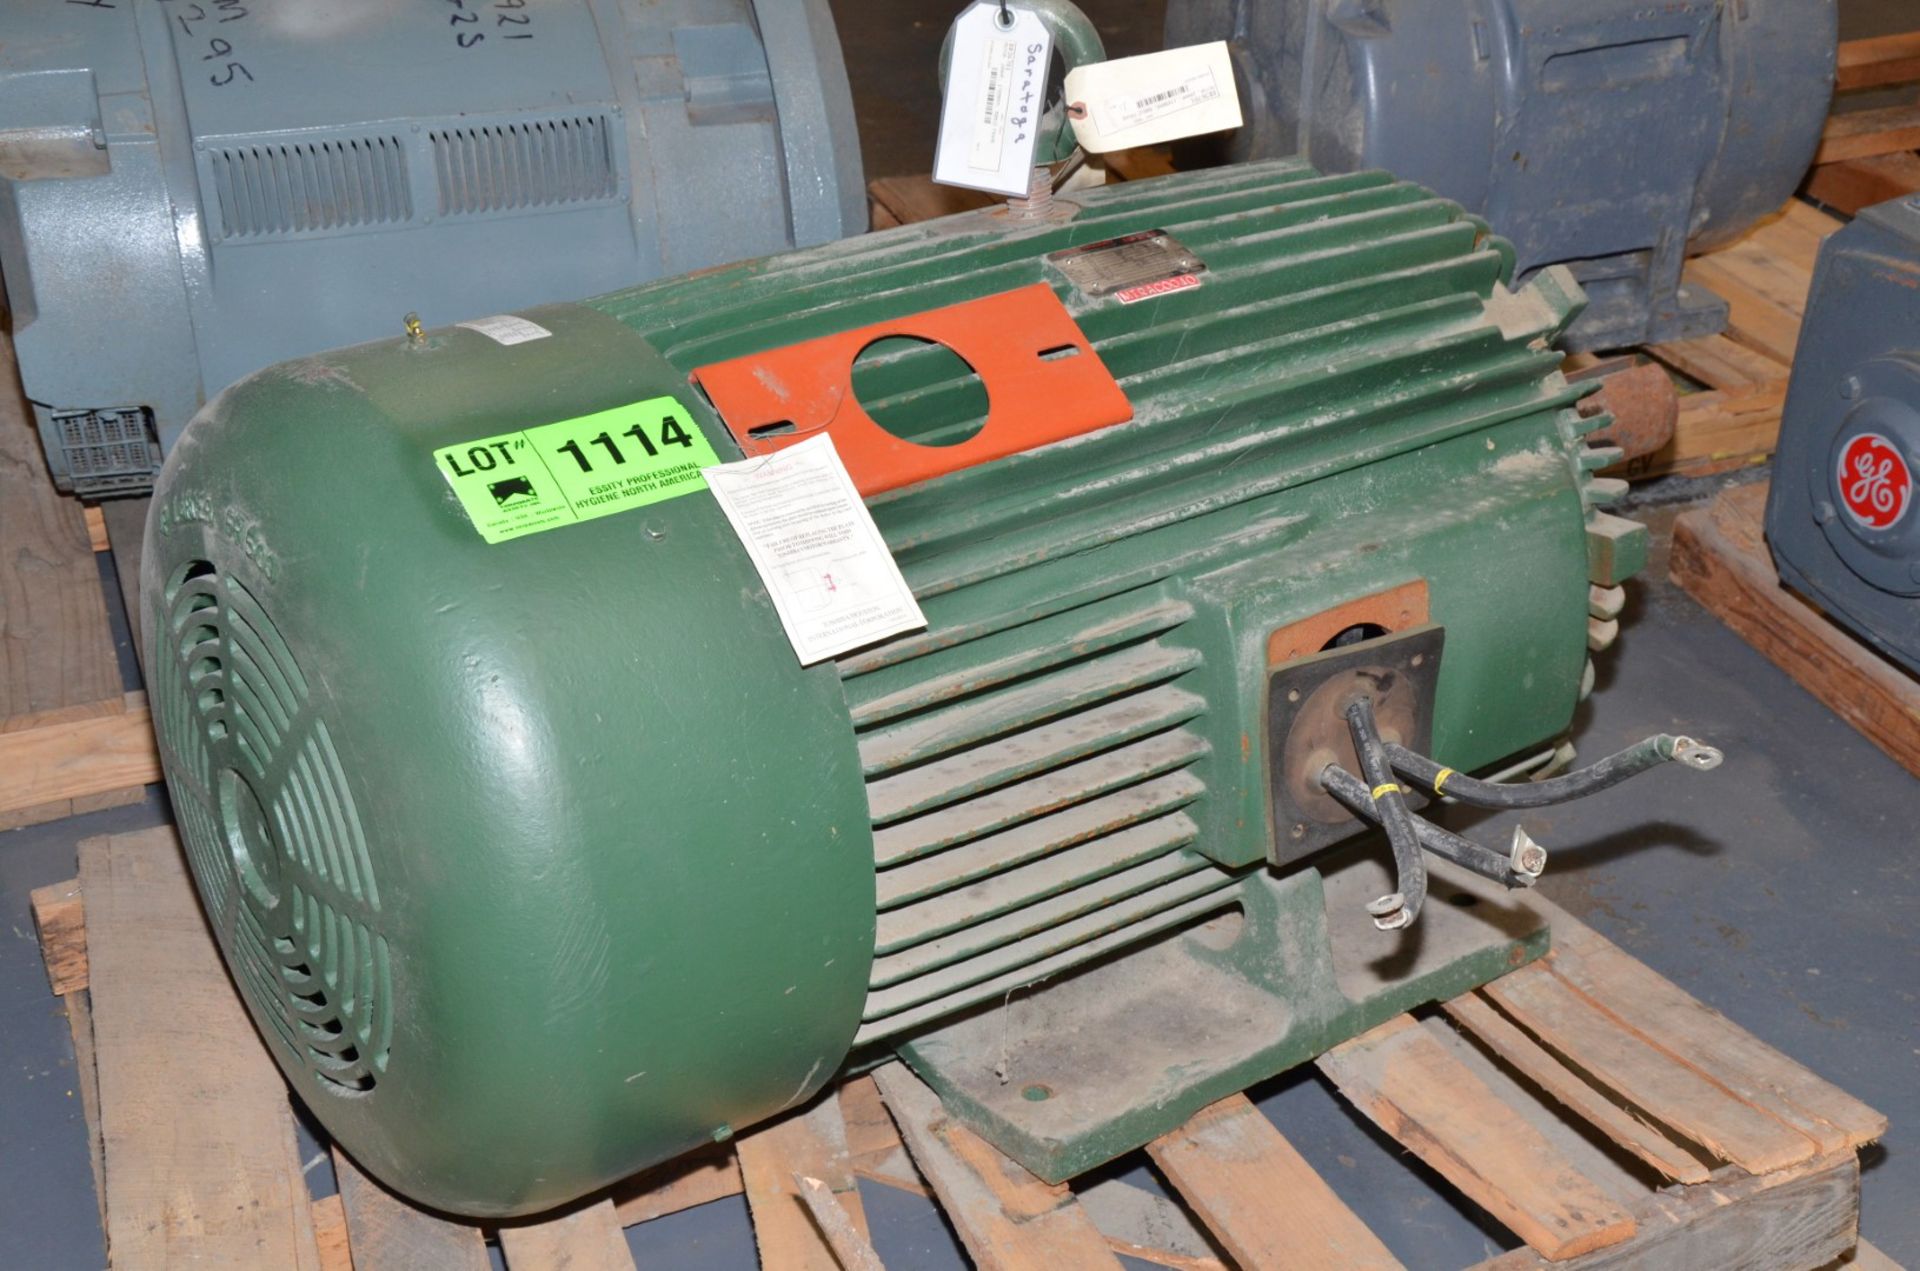 TOSHIBA 200 HP 460V 1785 RPM ELECTRIC MOTOR [RIGGING FEE FOR LOT #1114 - $50 USD PLUS APPLICABLE